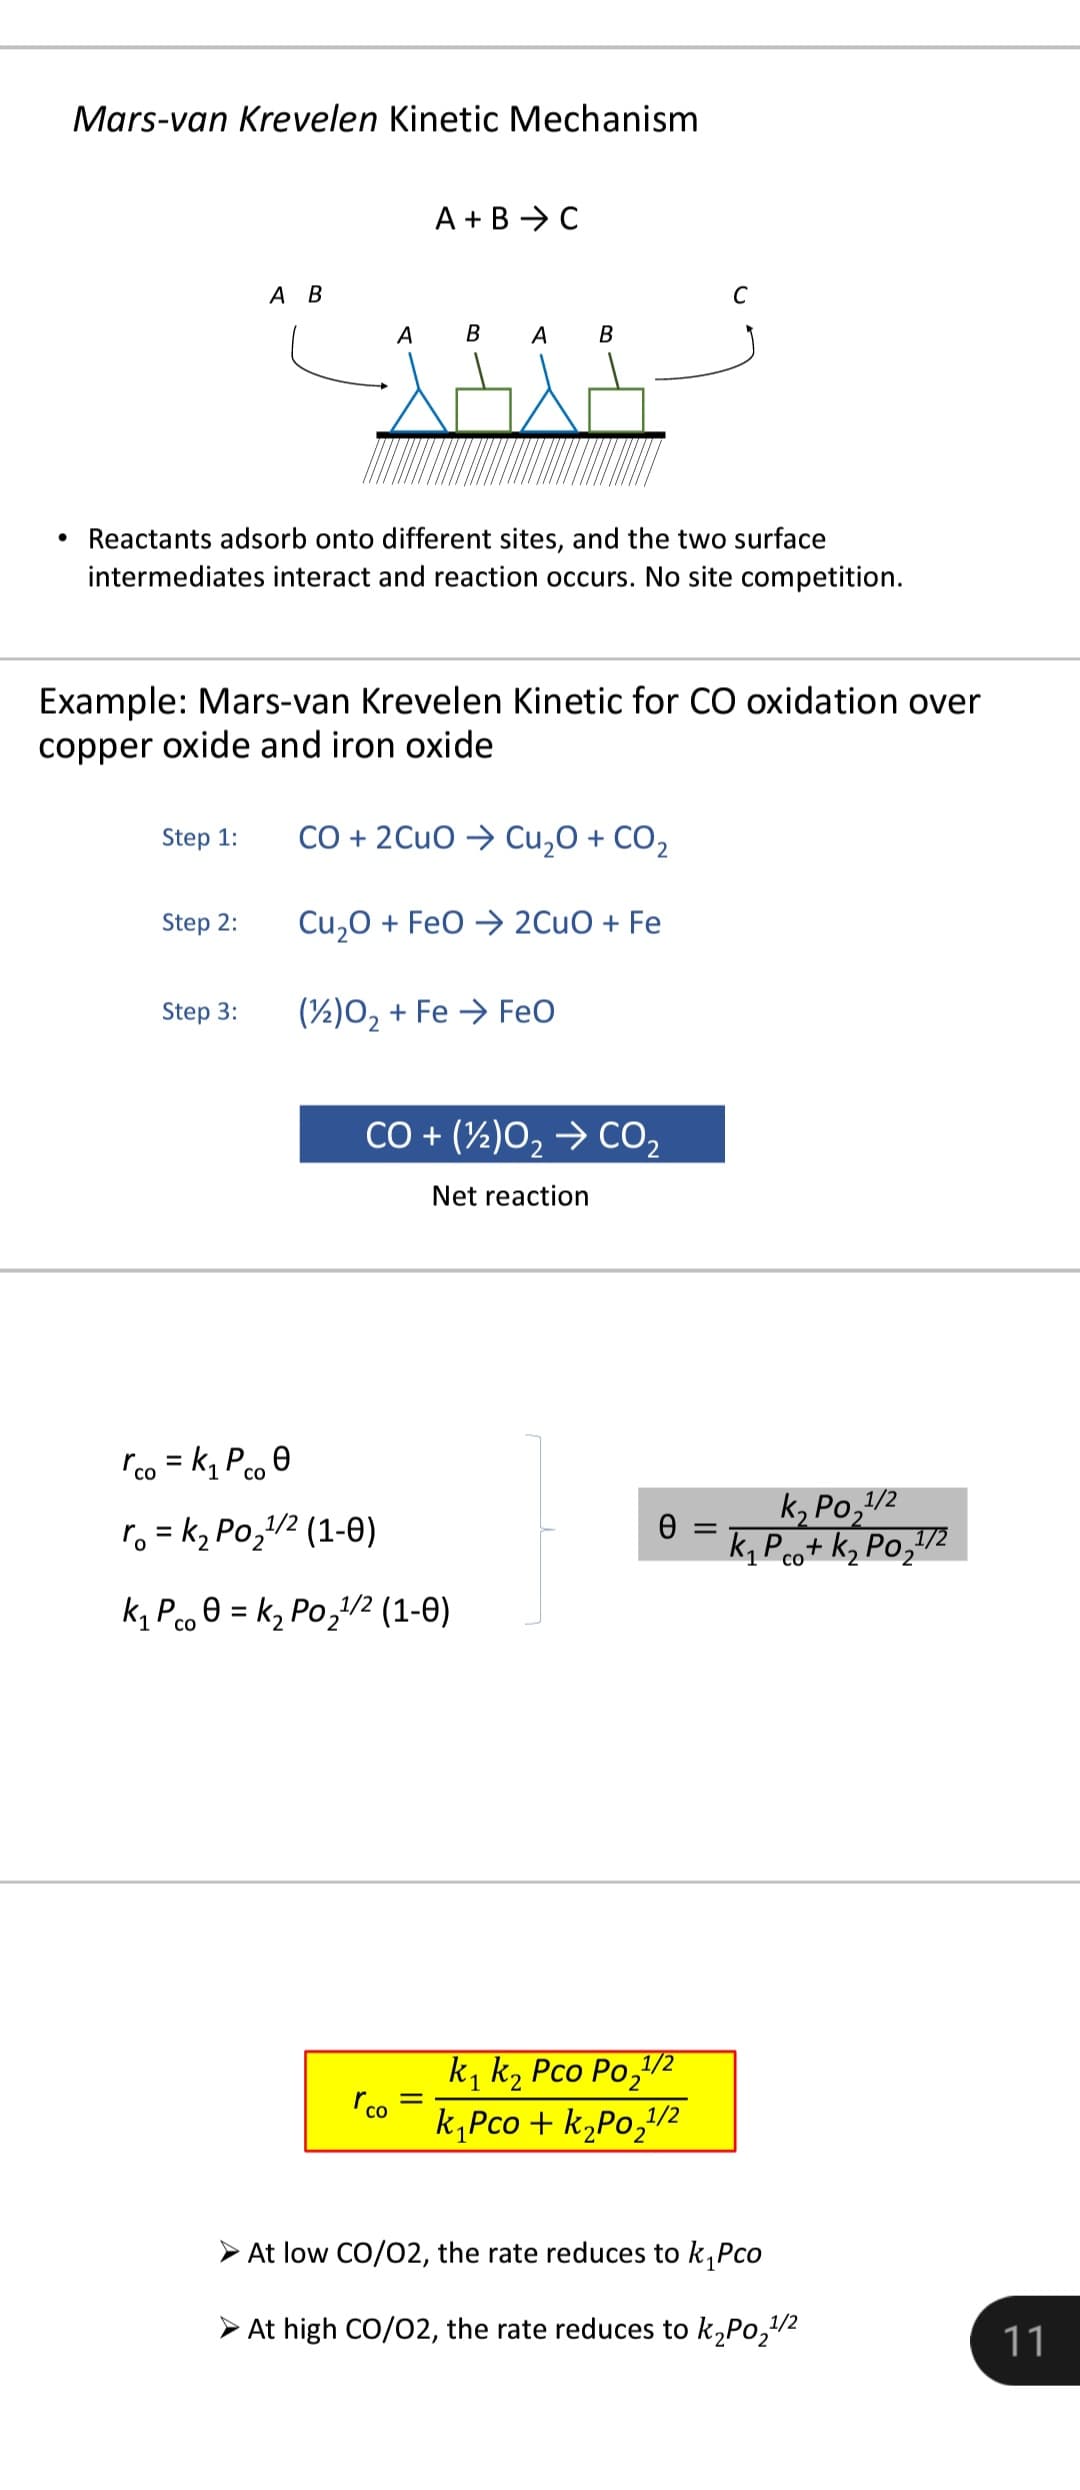 ●
Mars-van Krevelen Kinetic Mechanism
Step 1:
A B
Reactants adsorb onto different sites, and the two surface
intermediates interact and reaction occurs. No site competition.
Step 2:
Example: Mars-van Krevelen Kinetic for CO oxidation over
copper oxide and iron oxide
Step 3:
A B A B
A + B → C
CO + 2 CuO → Cu₂O + CO₂
Cu₂O + FeO
2CuO + Fe
(12)O₂+ Fe FeO
rco = k₁ Pco Ⓒ
со
r = K₂Po₂¹/² (1-0)
CO + (½)O₂ → CO₂
Net reaction
K₁ Pcok₂ Po₂¹/2² (1-0)
=
r co
=
k₁ k₂ Pco Po,1/2
k₁pco + k₂Po₂¹/2
=
¹1/2
k₂Po₂¹
K₂Po+k₂Po₂¹/2
At low CO/02, the rate reduces to k₁pco
➤ At high CO/O2, the rate reduces to k₂Po₂¹/2
11